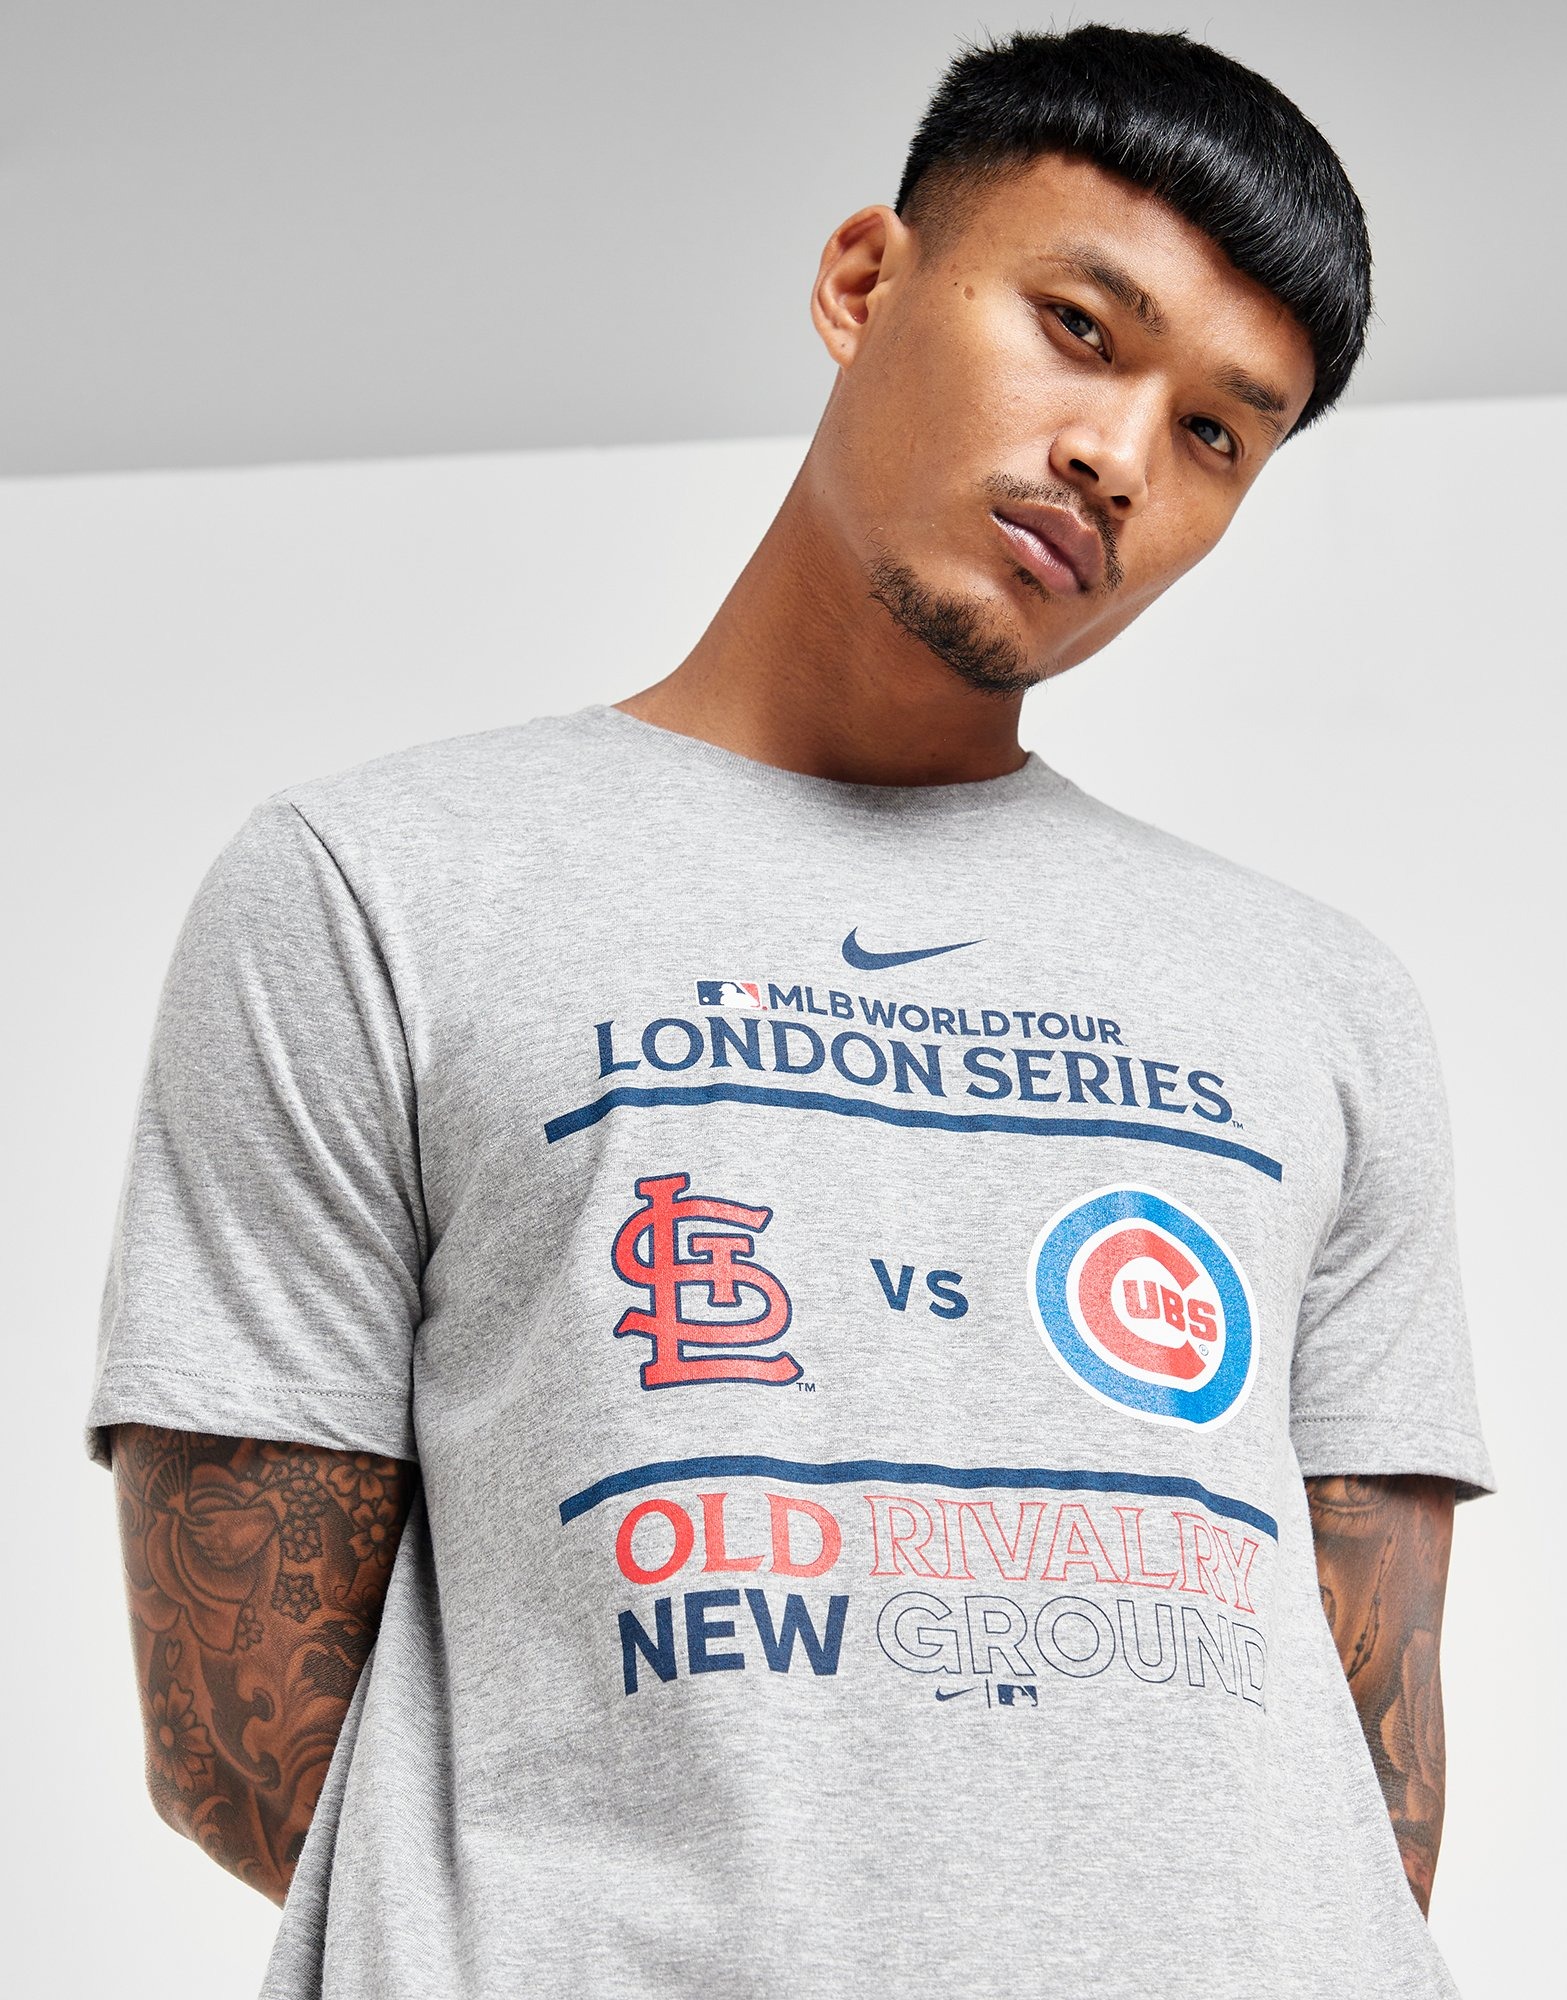 Chicago Cubs 2T Size MLB Shirts for sale